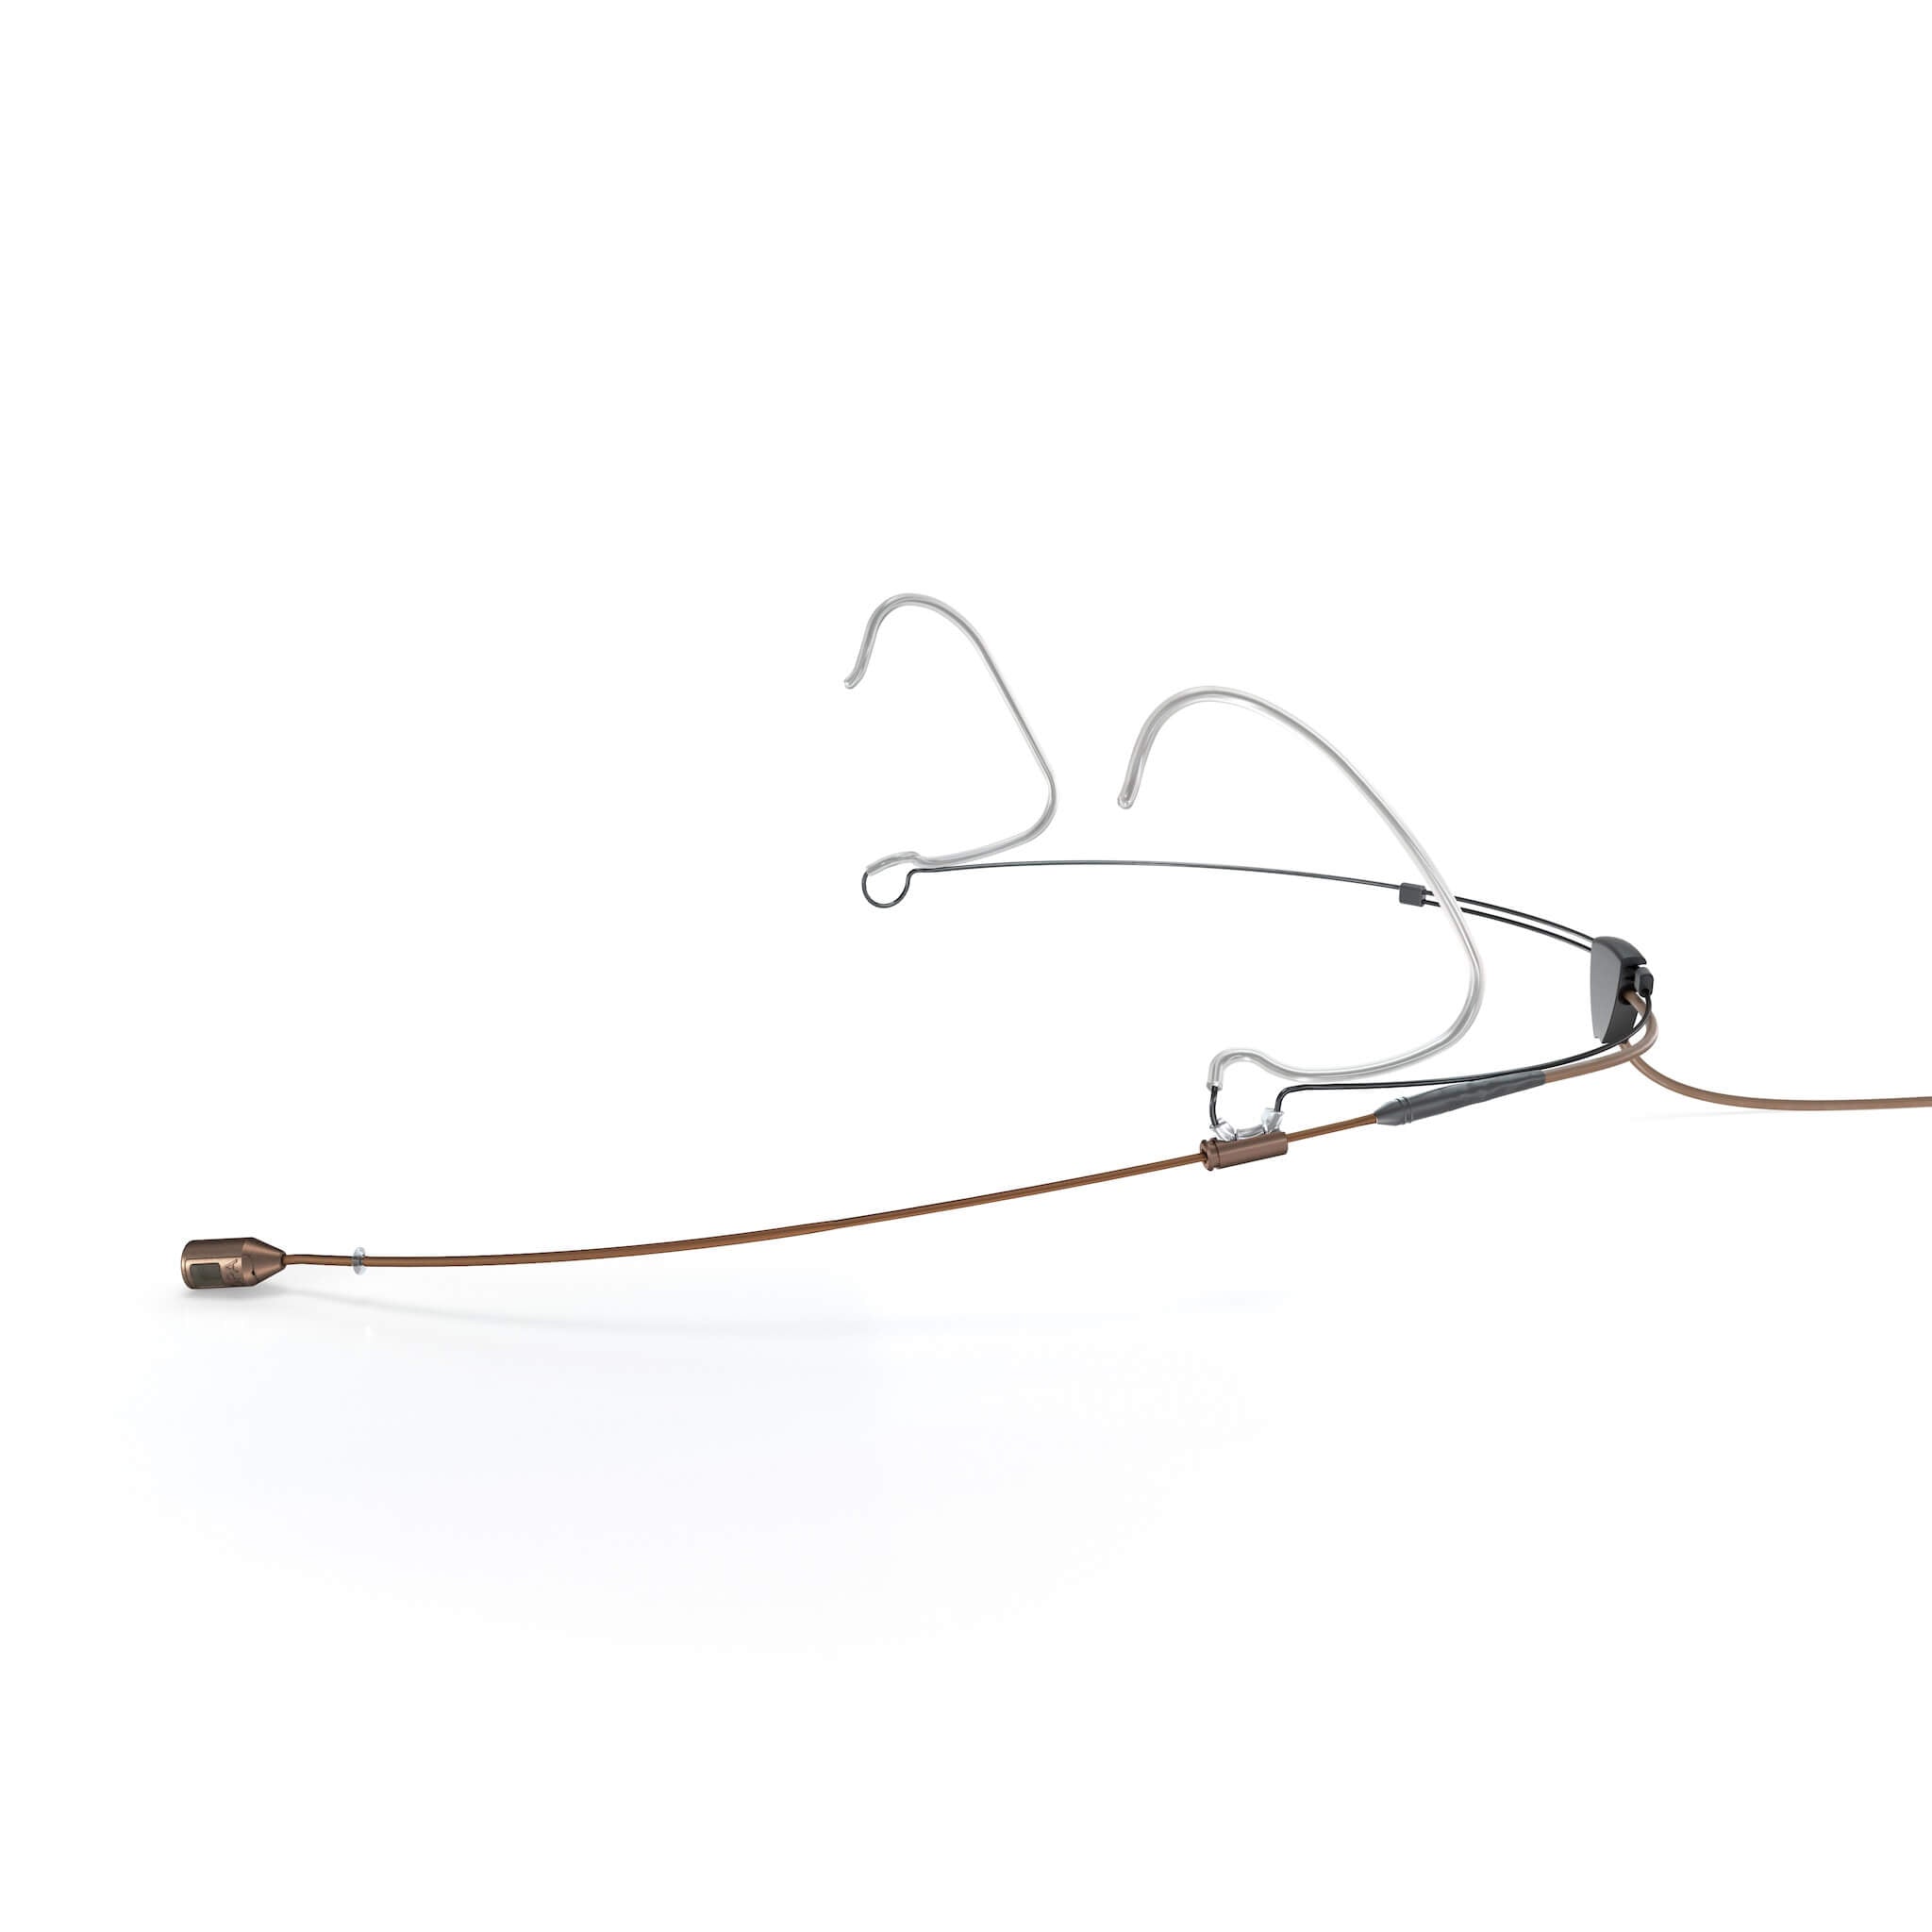 DPA 4488 CORE Directional Headset Microphone, brown